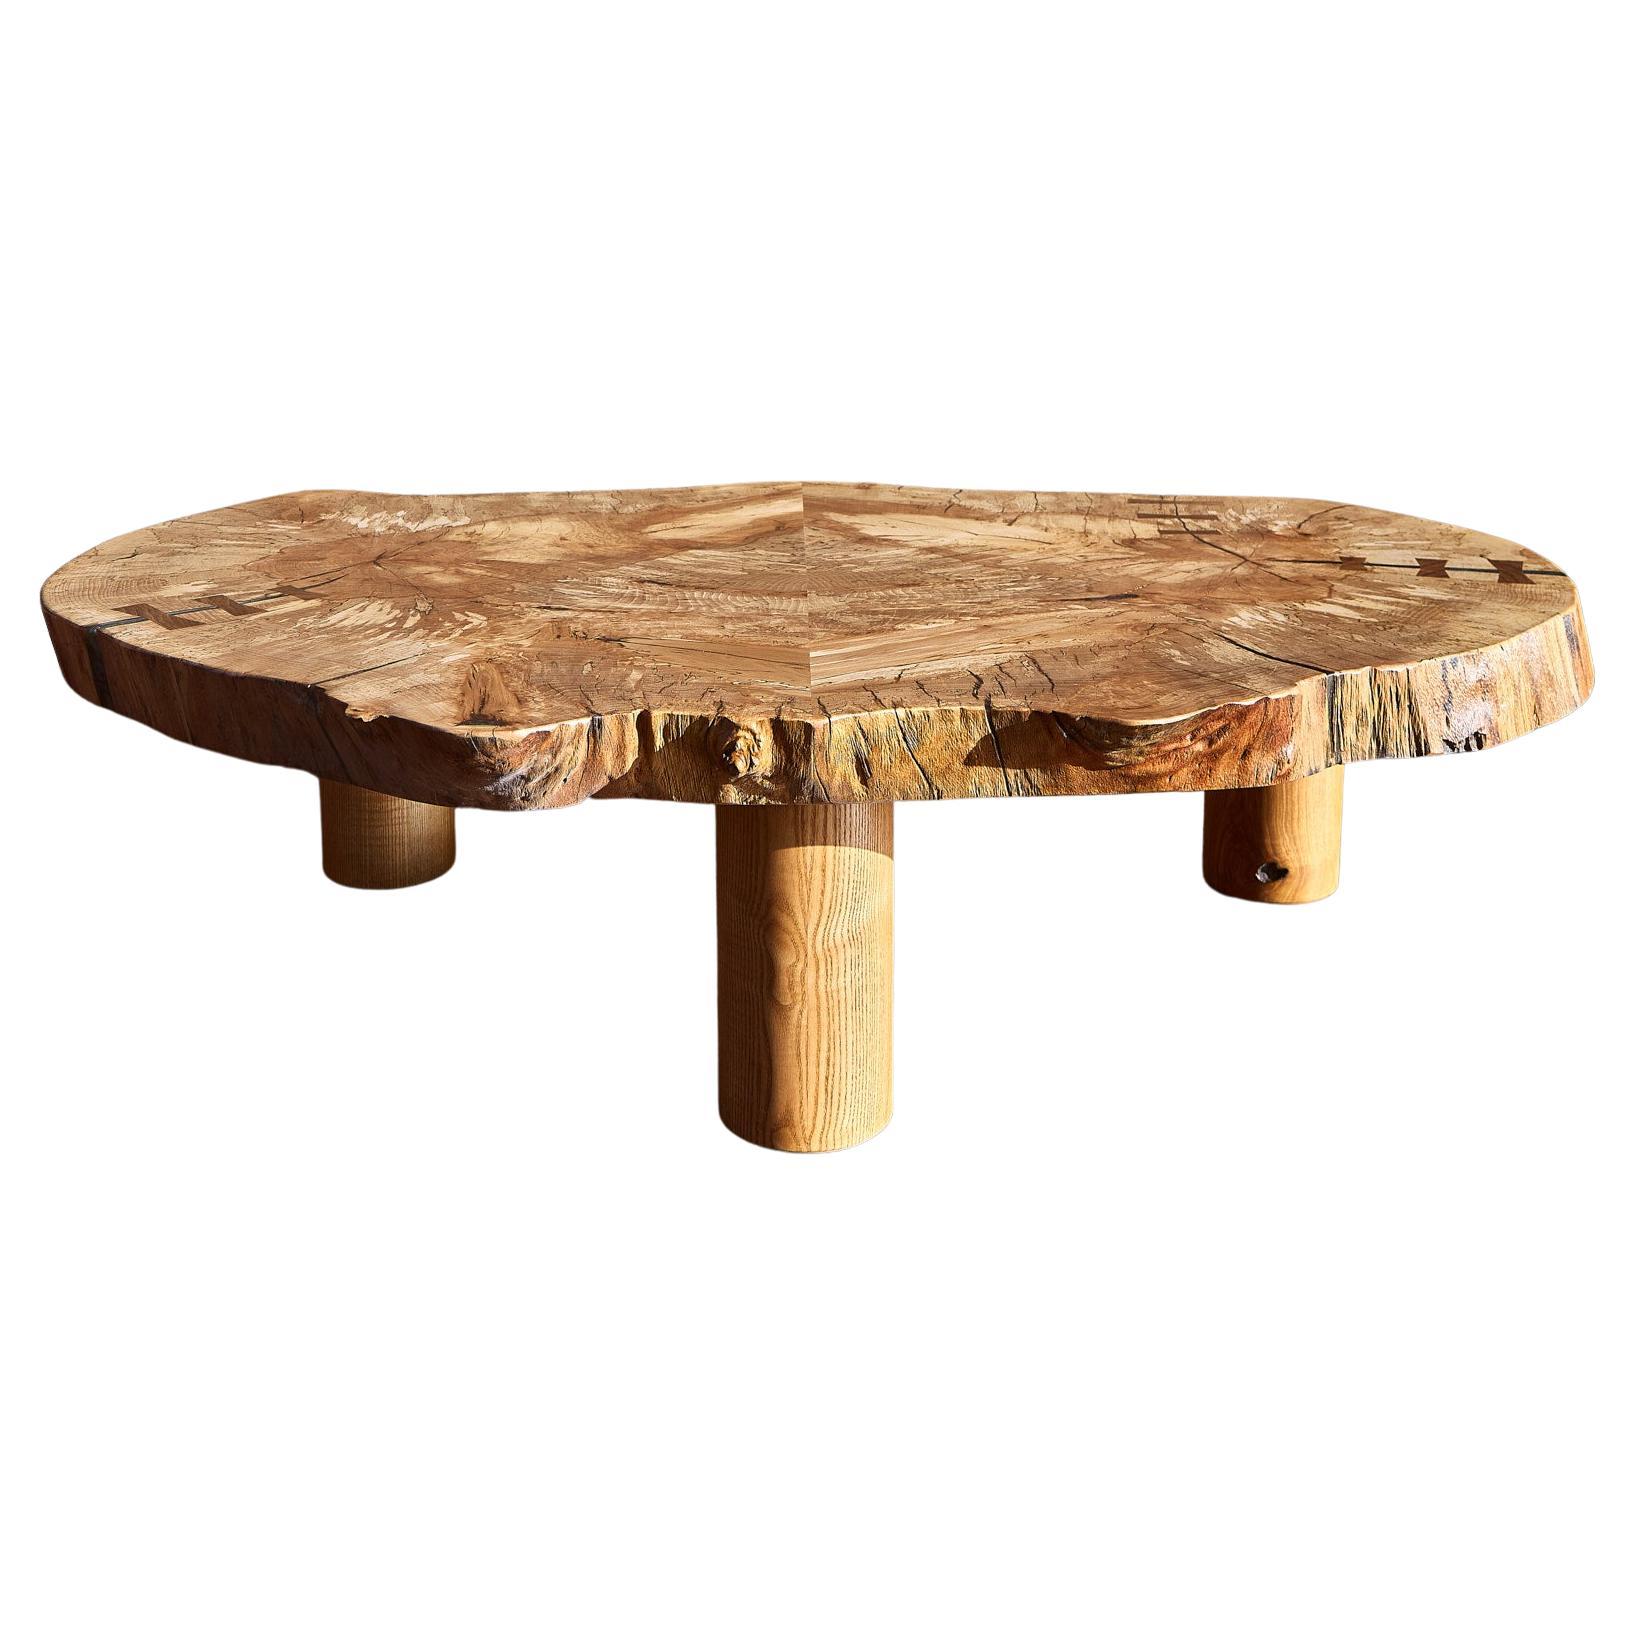 Cocoon Live Edge Beech Coffee Table by Egor Ivoilov, Contemporary Design 2022 For Sale